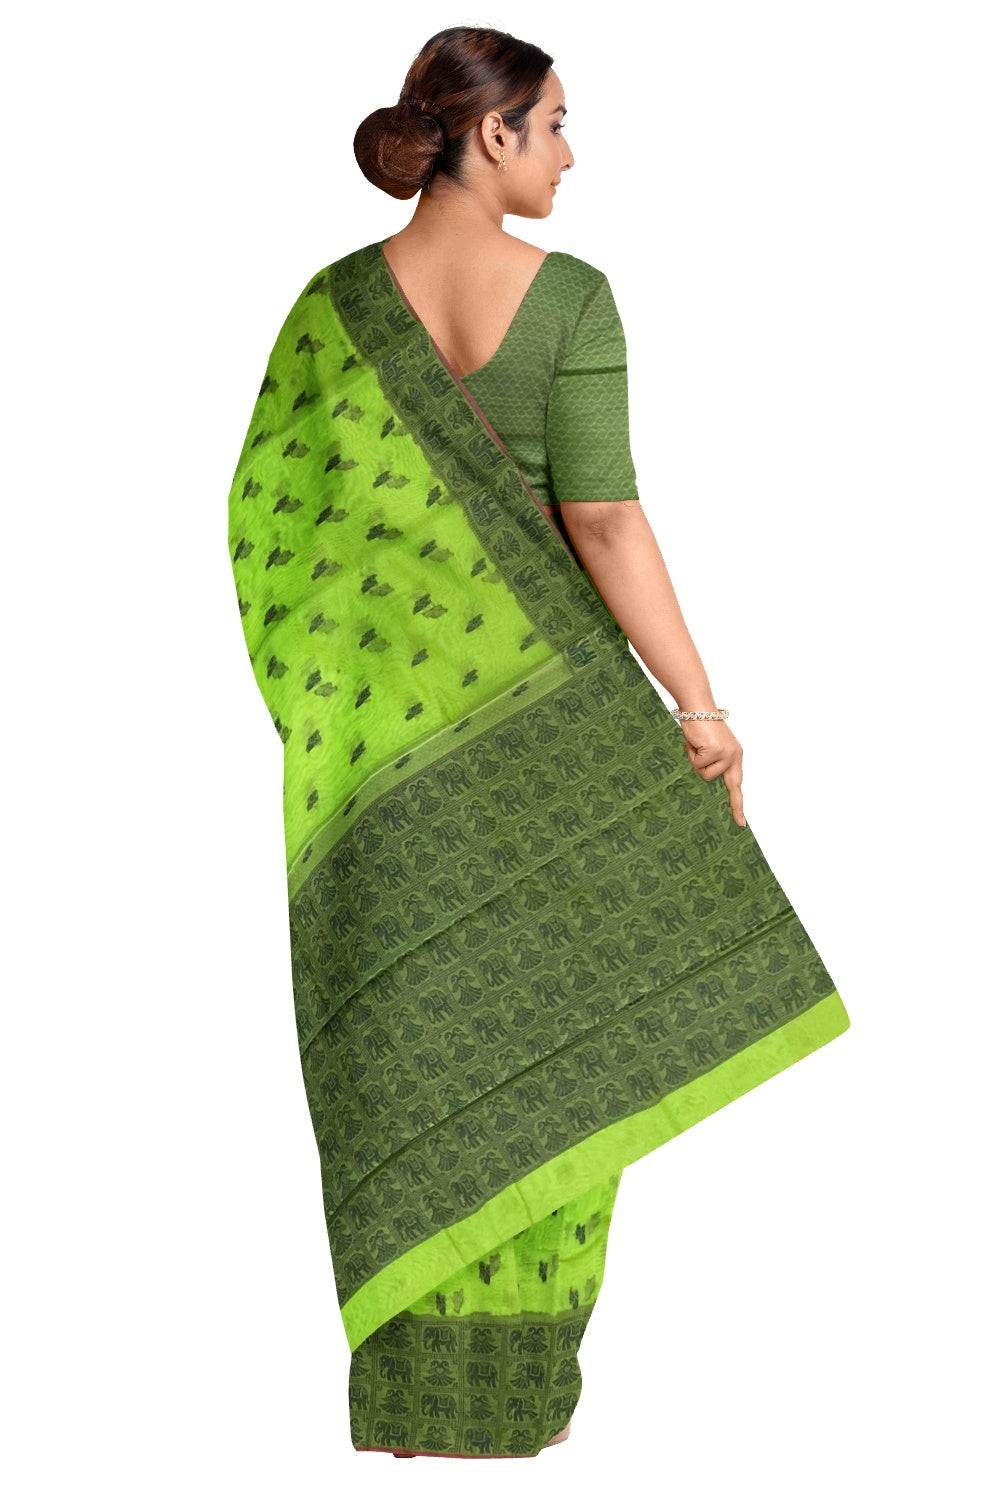 Southloom Sico Gadwal Semi Silk Sarees in Light Green and Green with Elephant Motifts (Blouse Piece with Work)